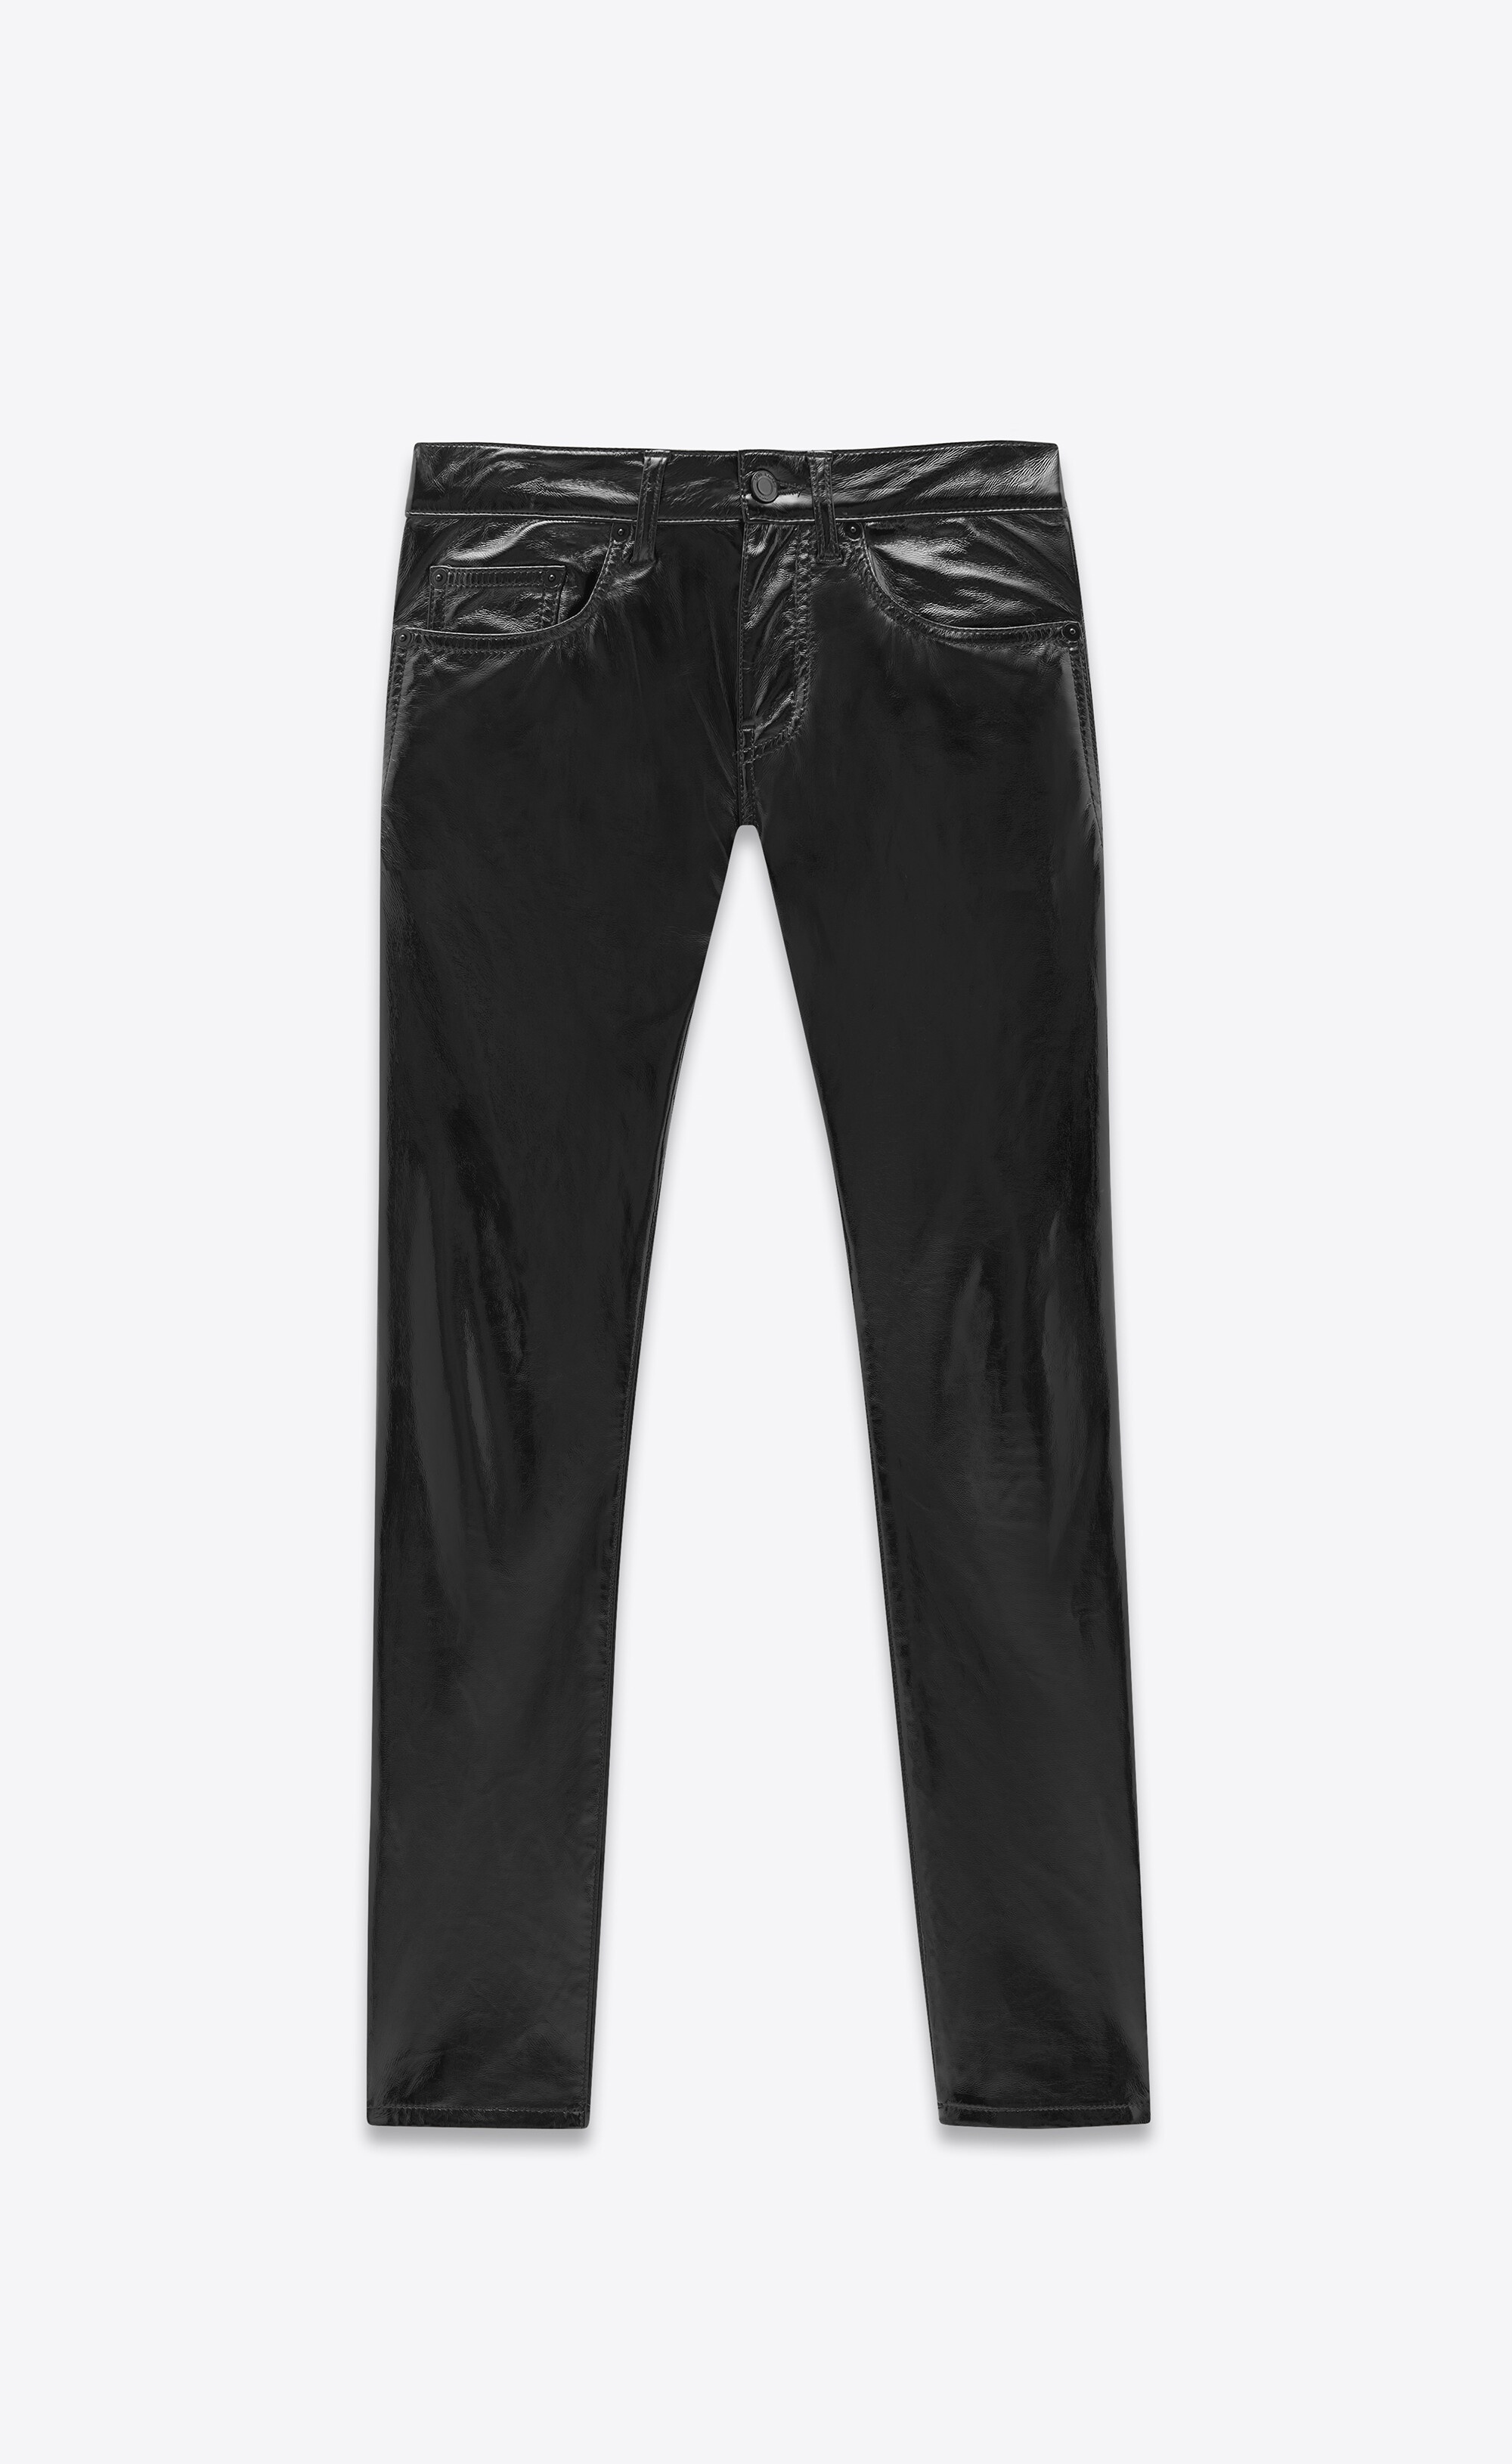 skinny-fit jeans in lacquered black denim - 1